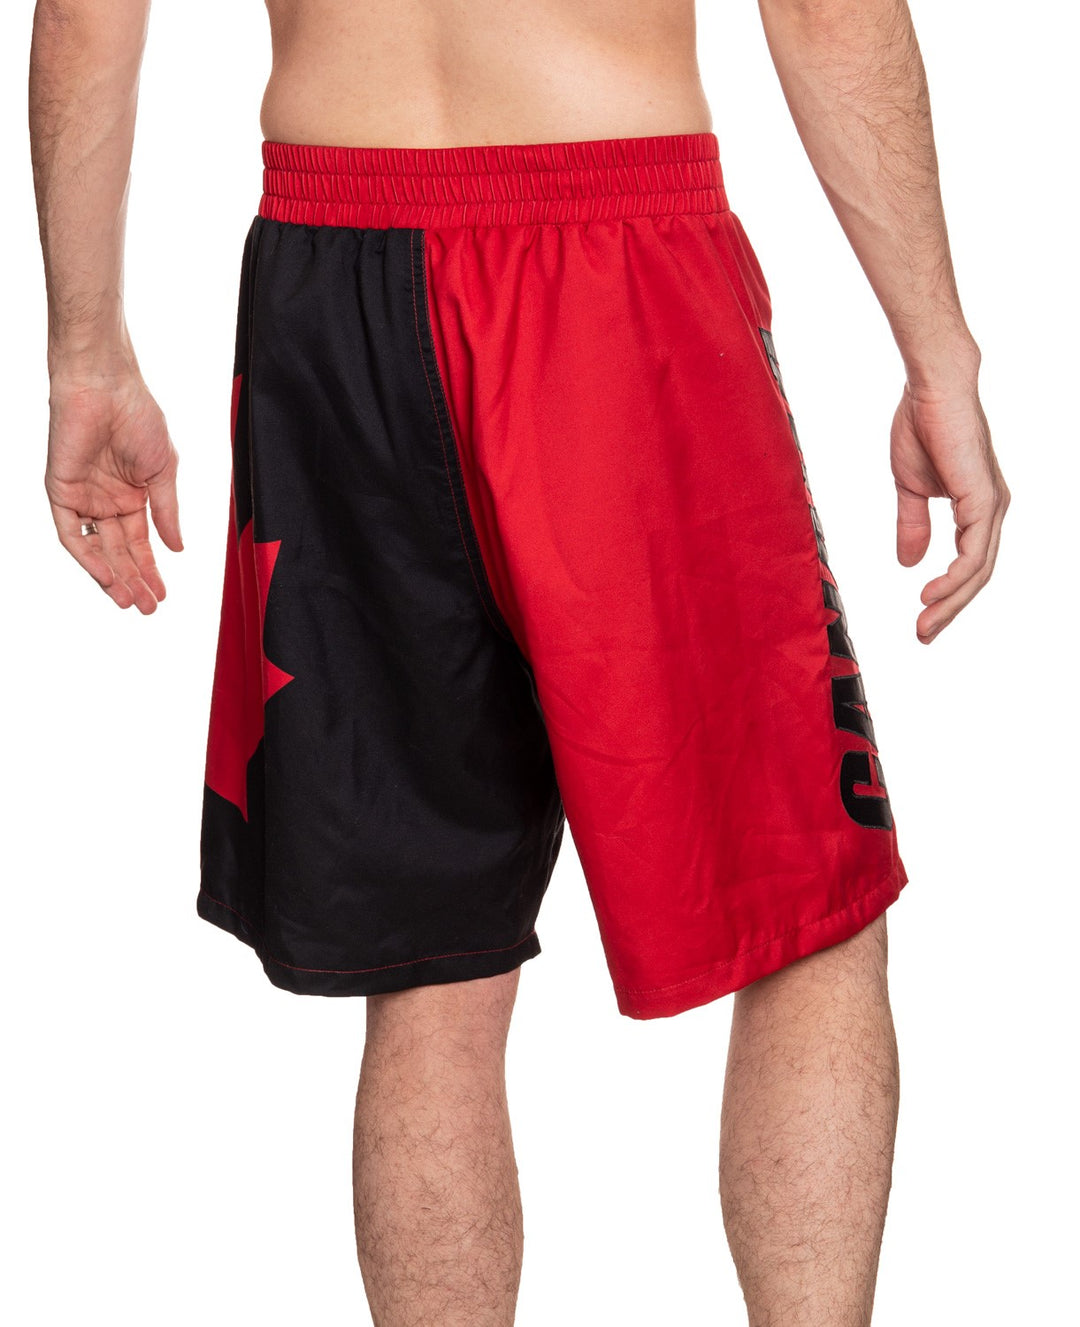 Canada Flag Boardshorts for Men in Red and Black Back View.